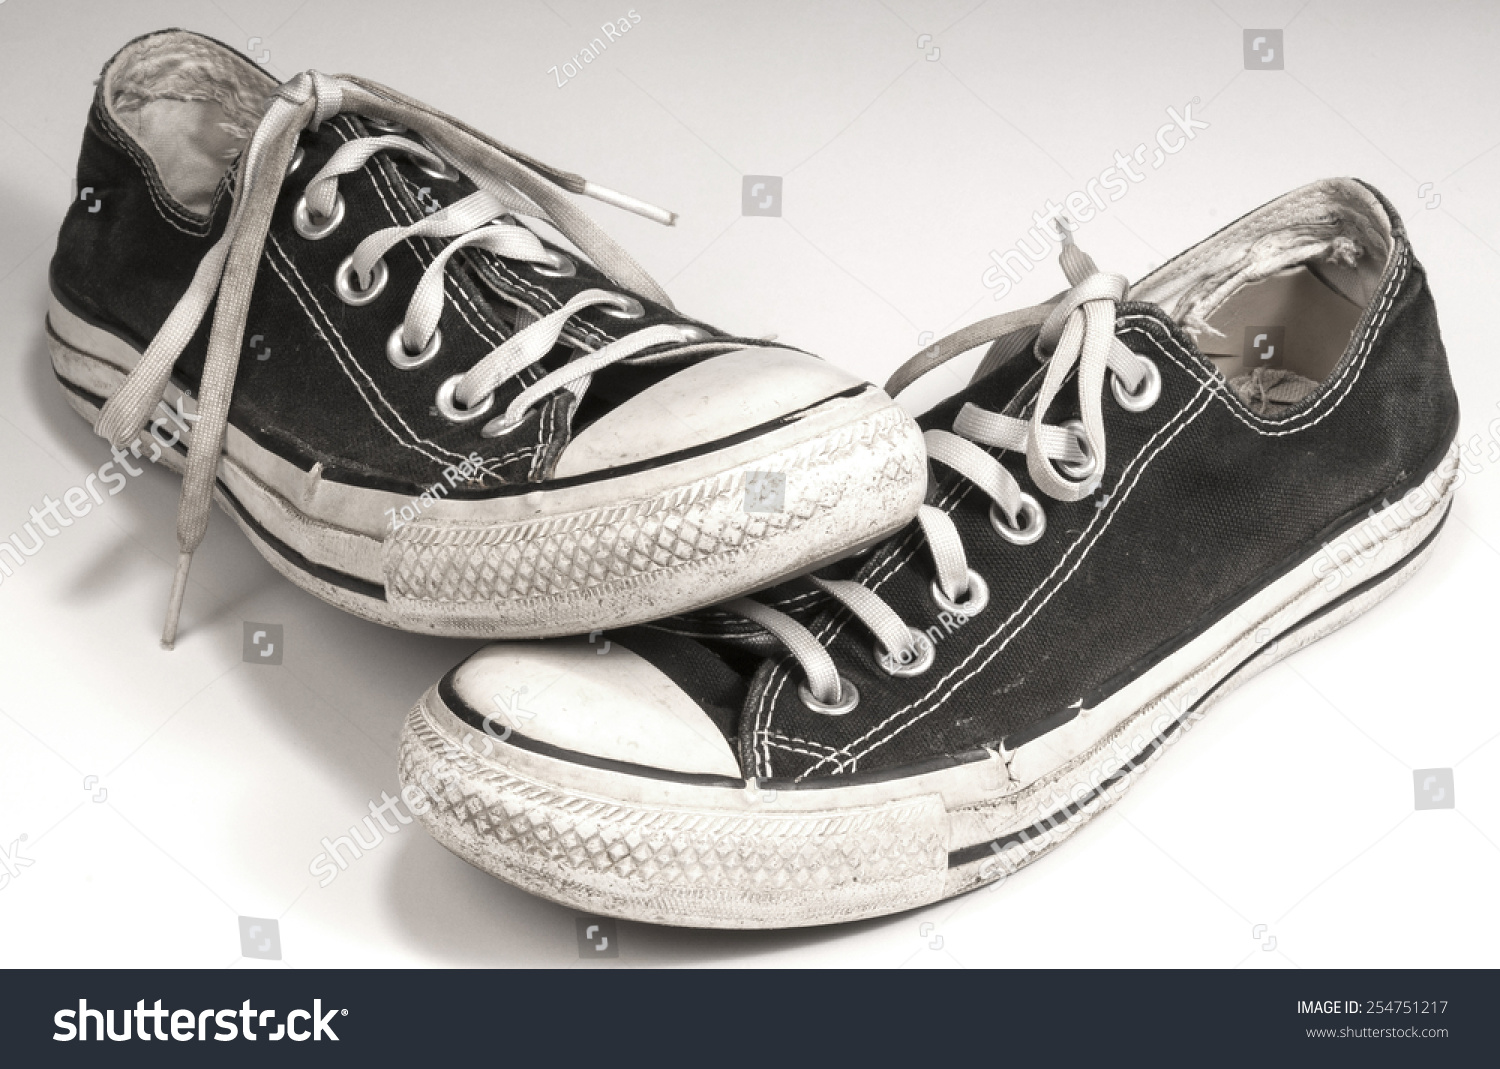 A Pair Of Black Canvas Sneakers On White Background Stock Photo ...